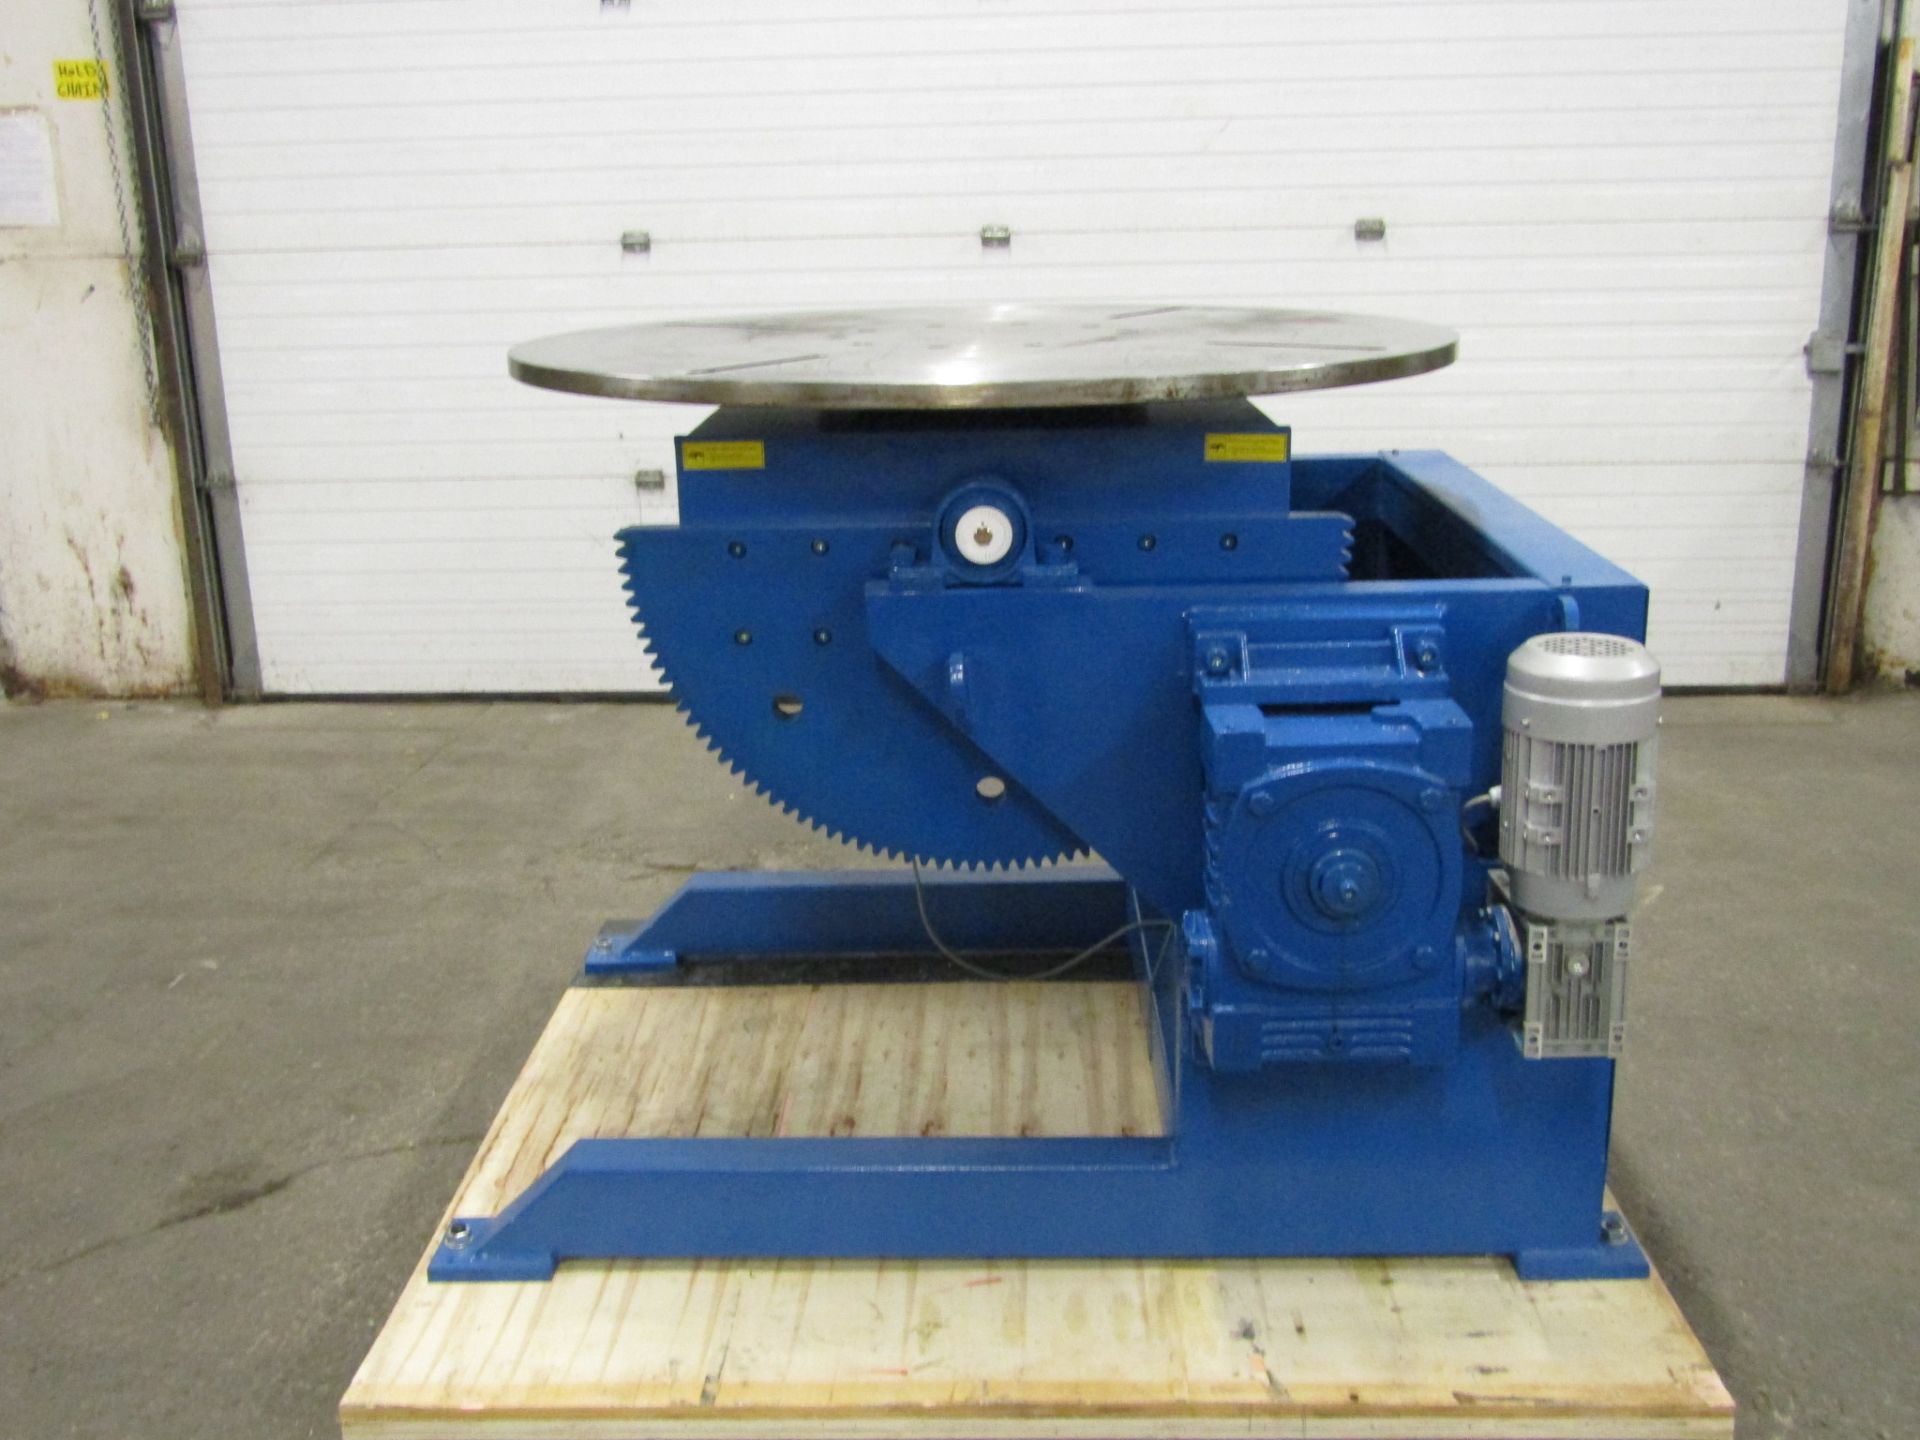 *****Verner model VD-3000 WELDING POSITIONER 3000lbs capacity - tilt and rotate with variable